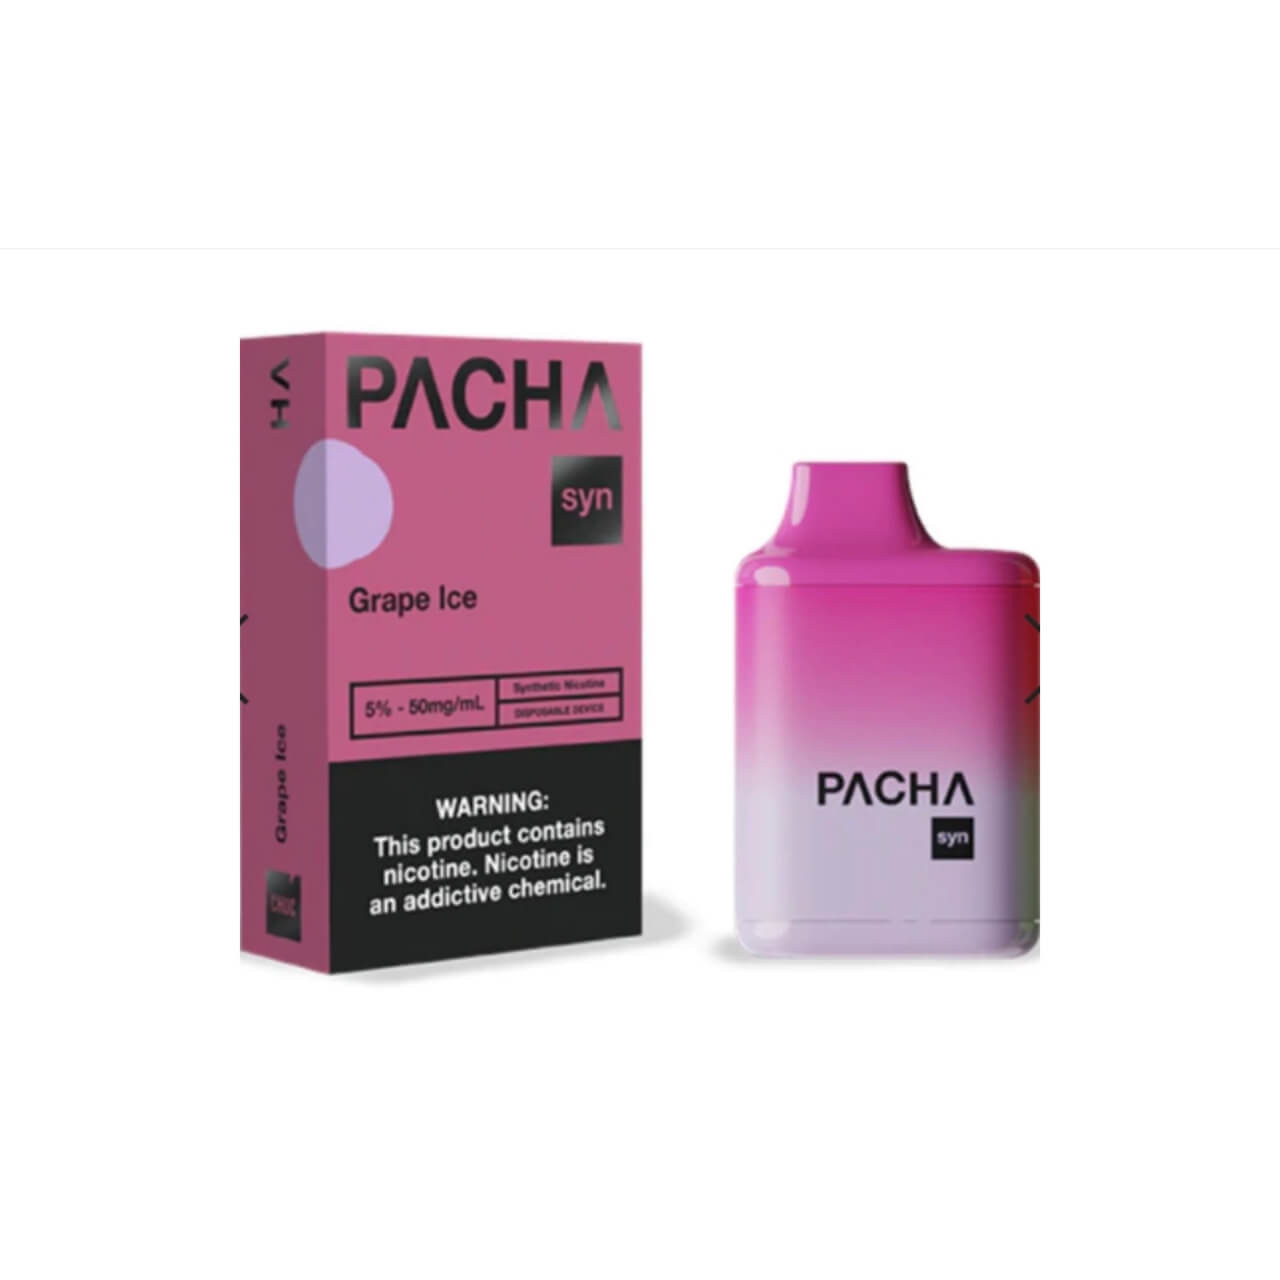 Pacha Syn Synthetic Nicotine Disposable Device